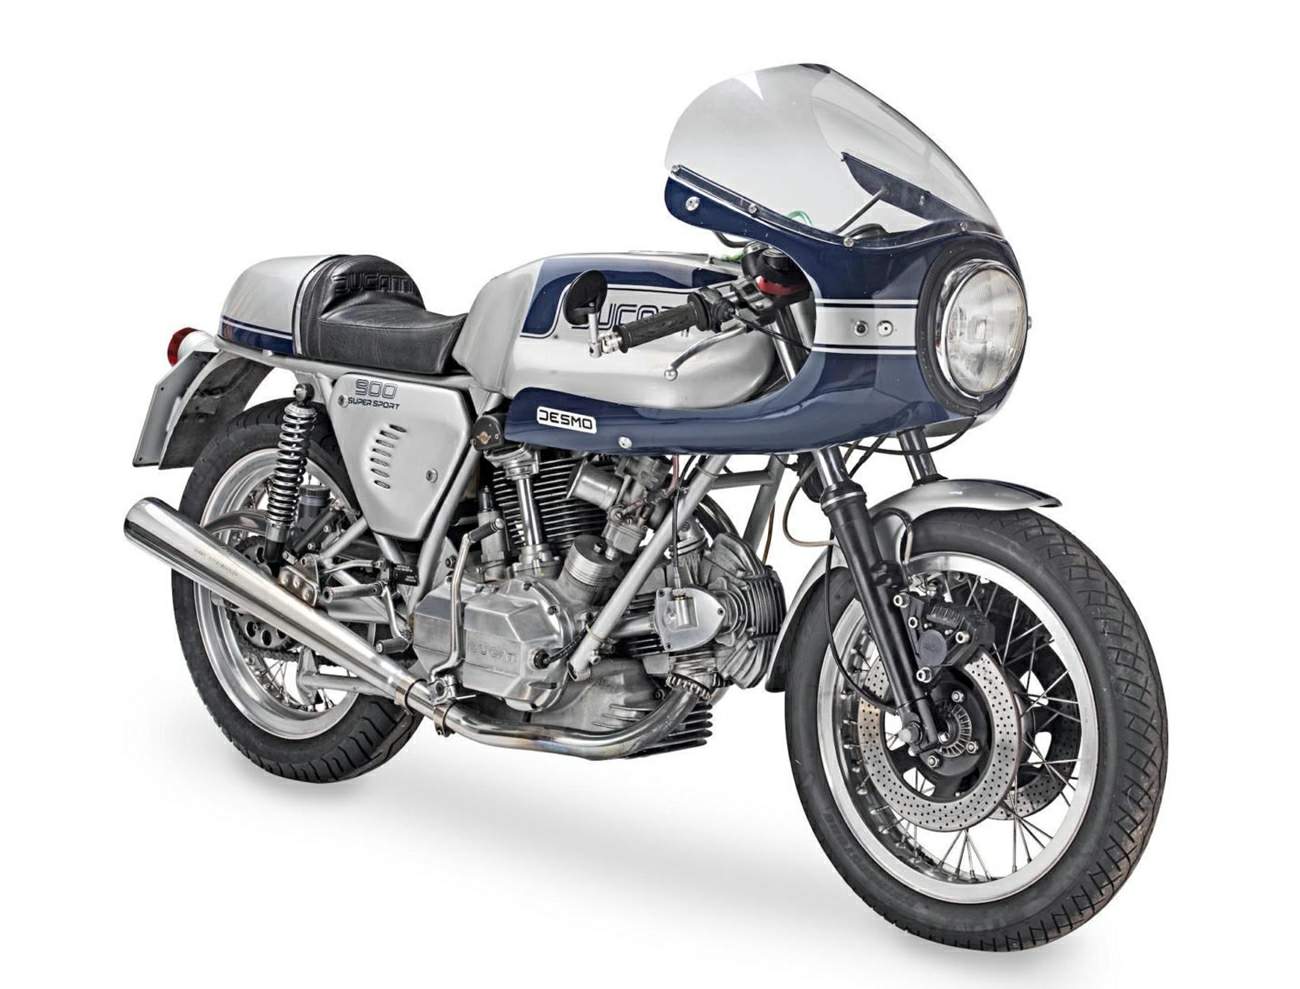 Ducati 900 SS technical specifications